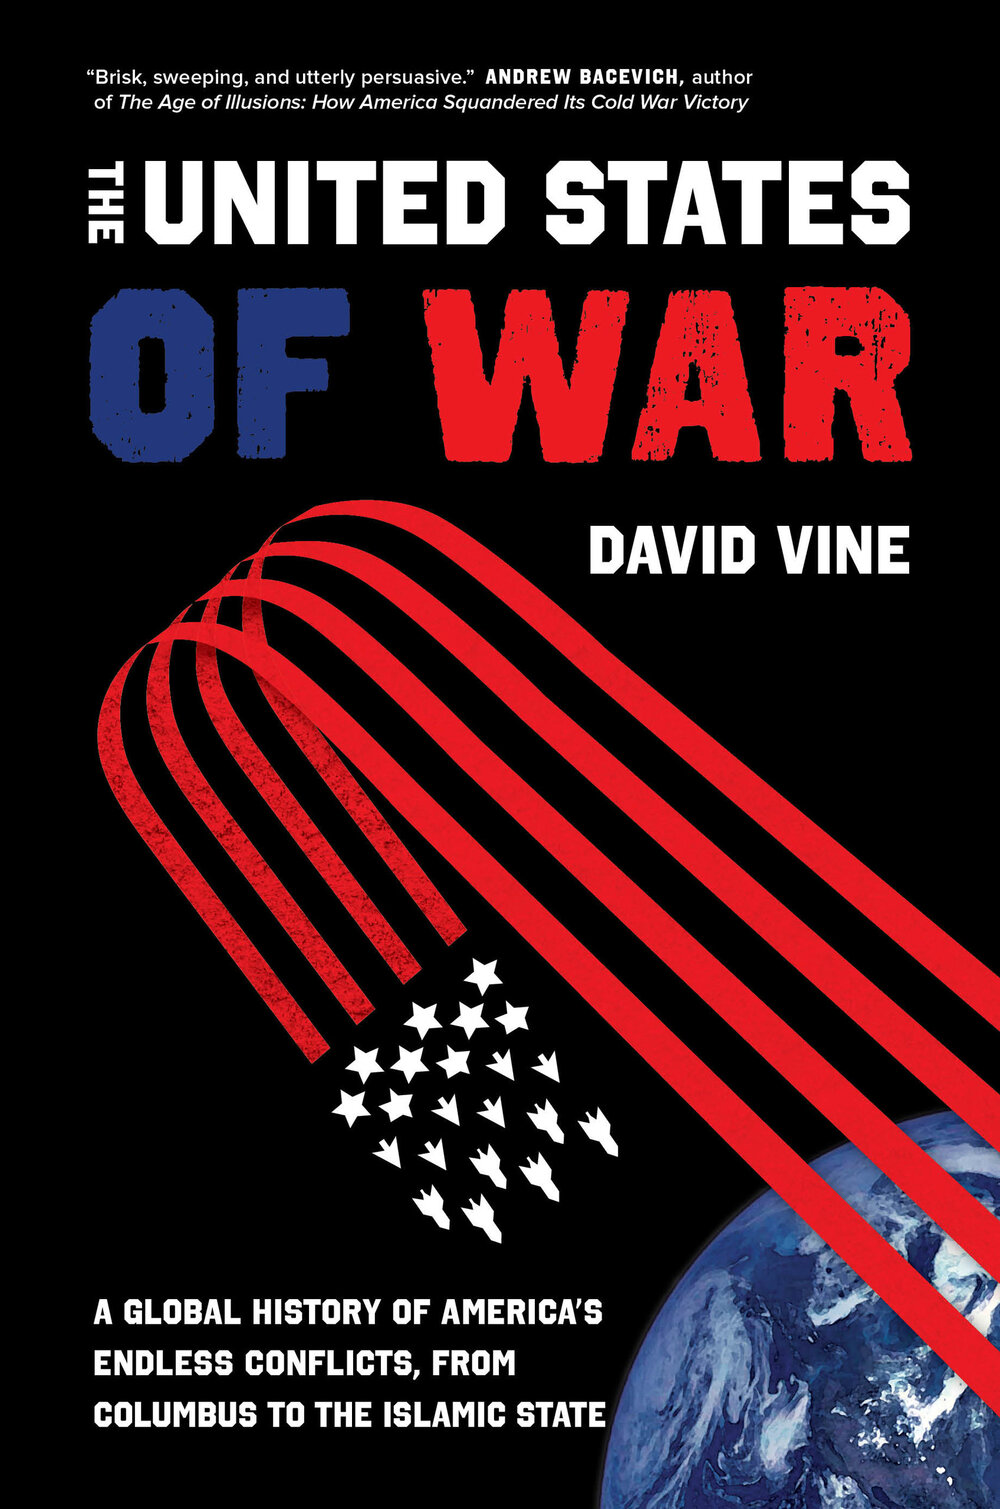 The United States of War: A Global History of America's Endless Conflicts, From Columbus to the Islamic State by David Vine